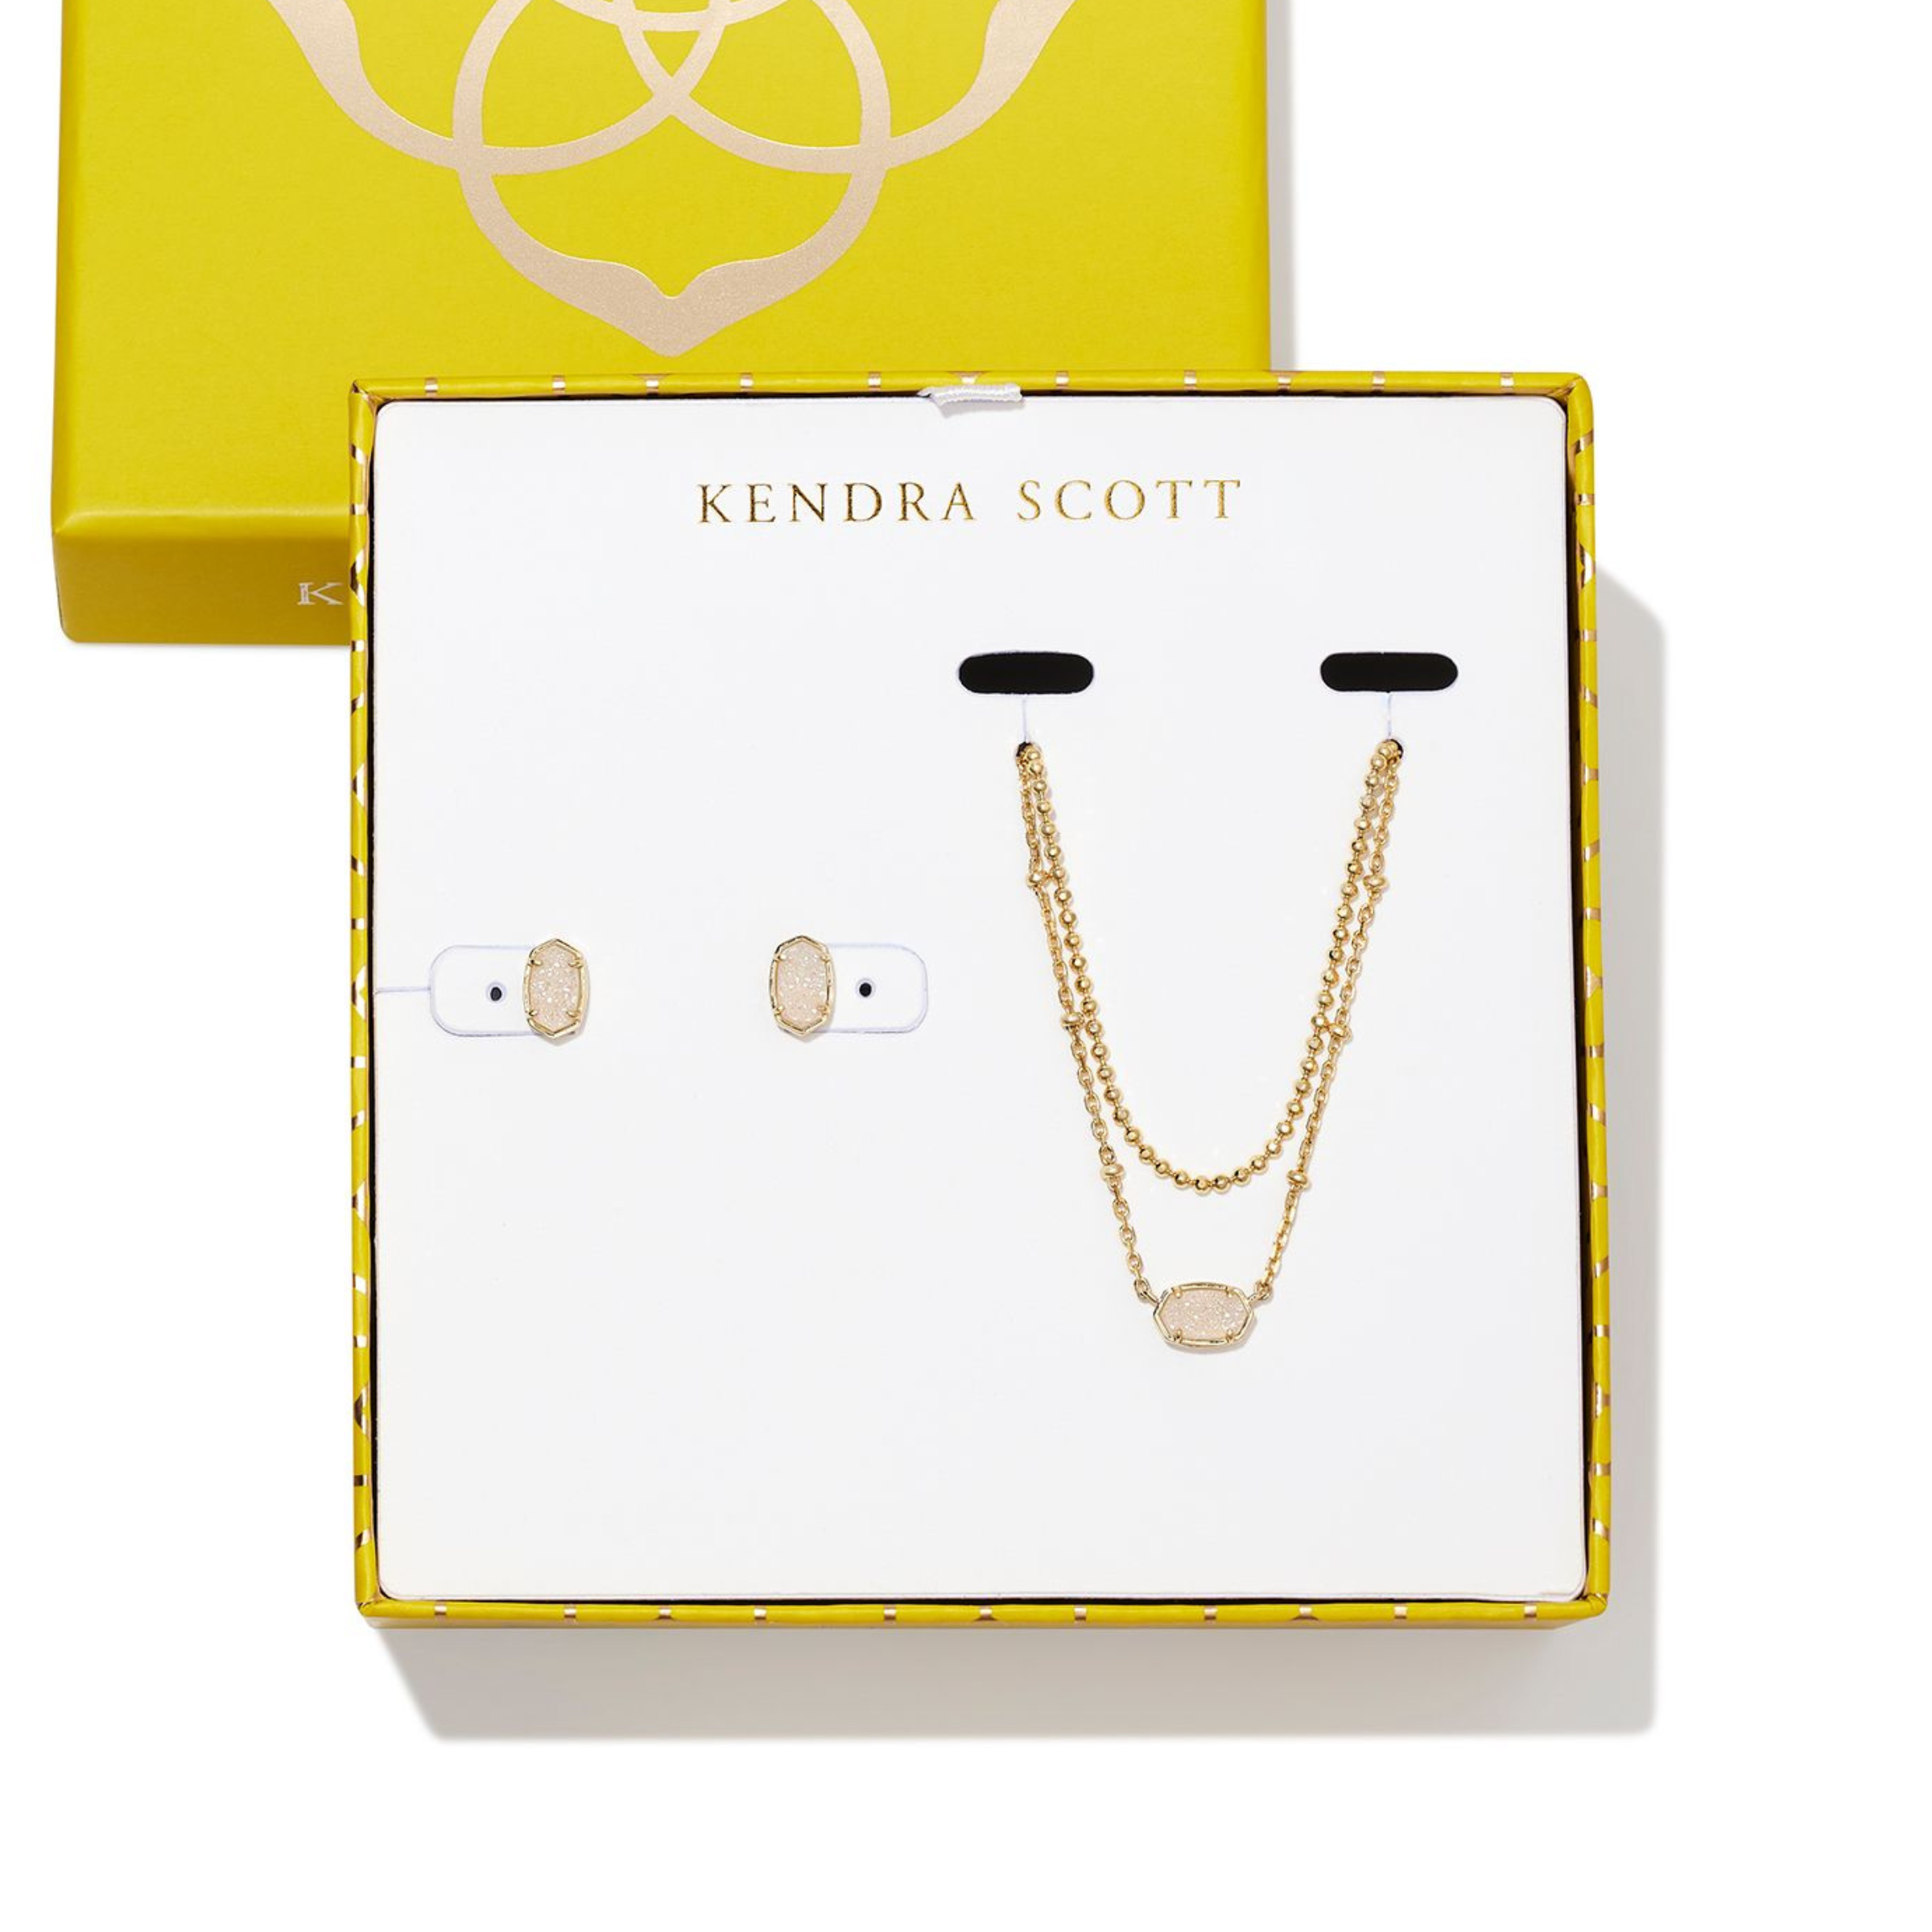 Two gold necklaces with one oval pendnant and gold oval earrings pictured in a Kendra Scott box. The oval pendants include iridescent drusy stones.